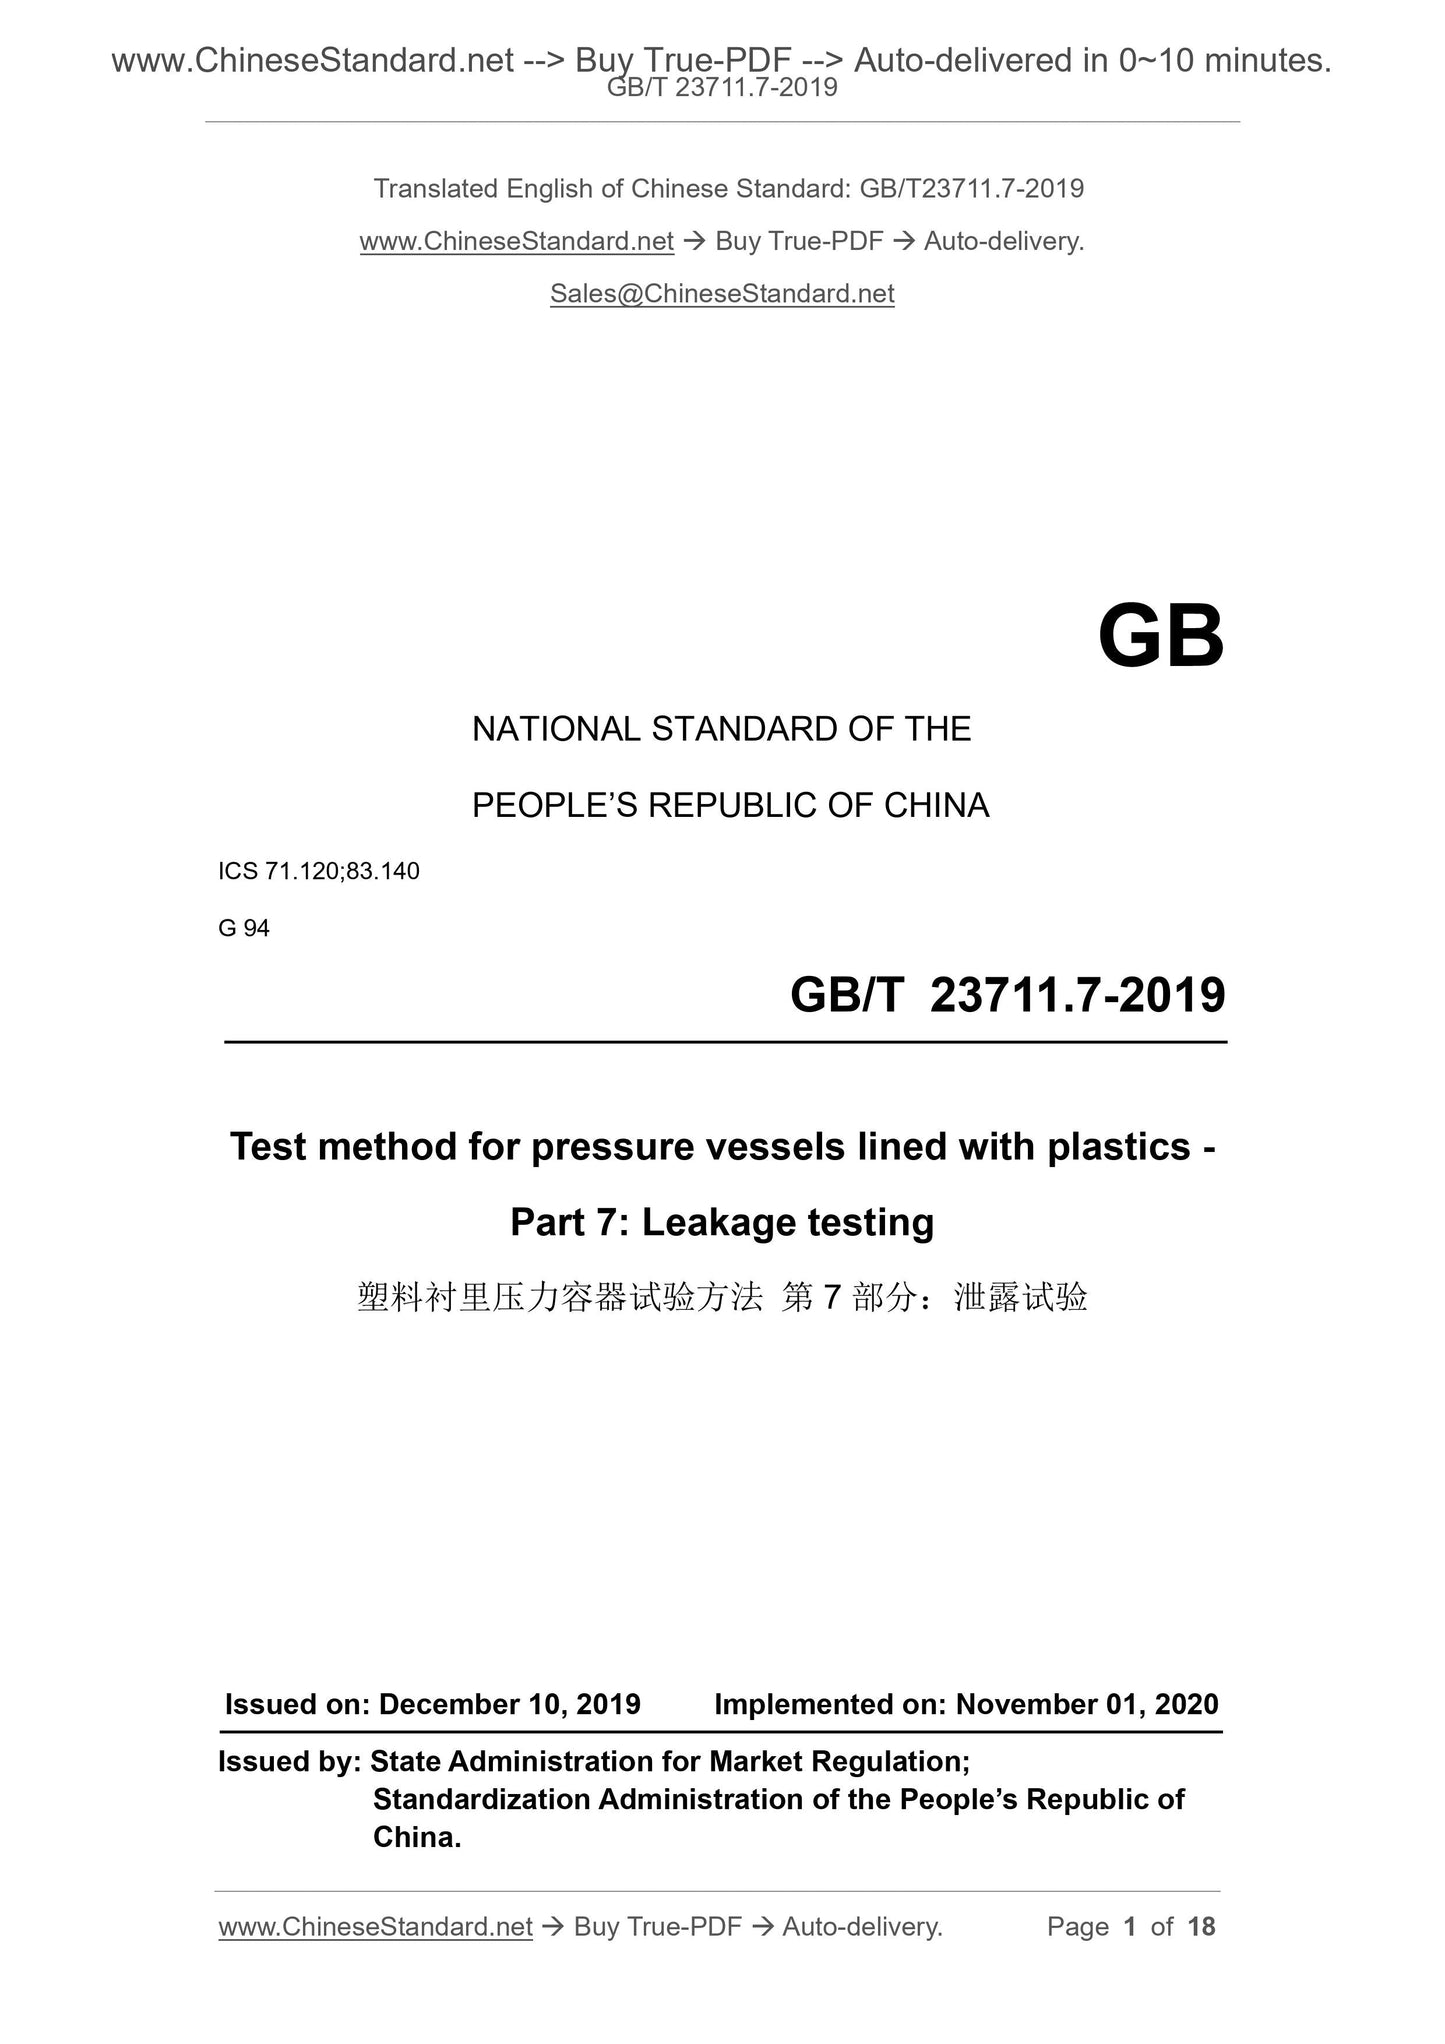 GB/T 23711.7-2019 Page 1